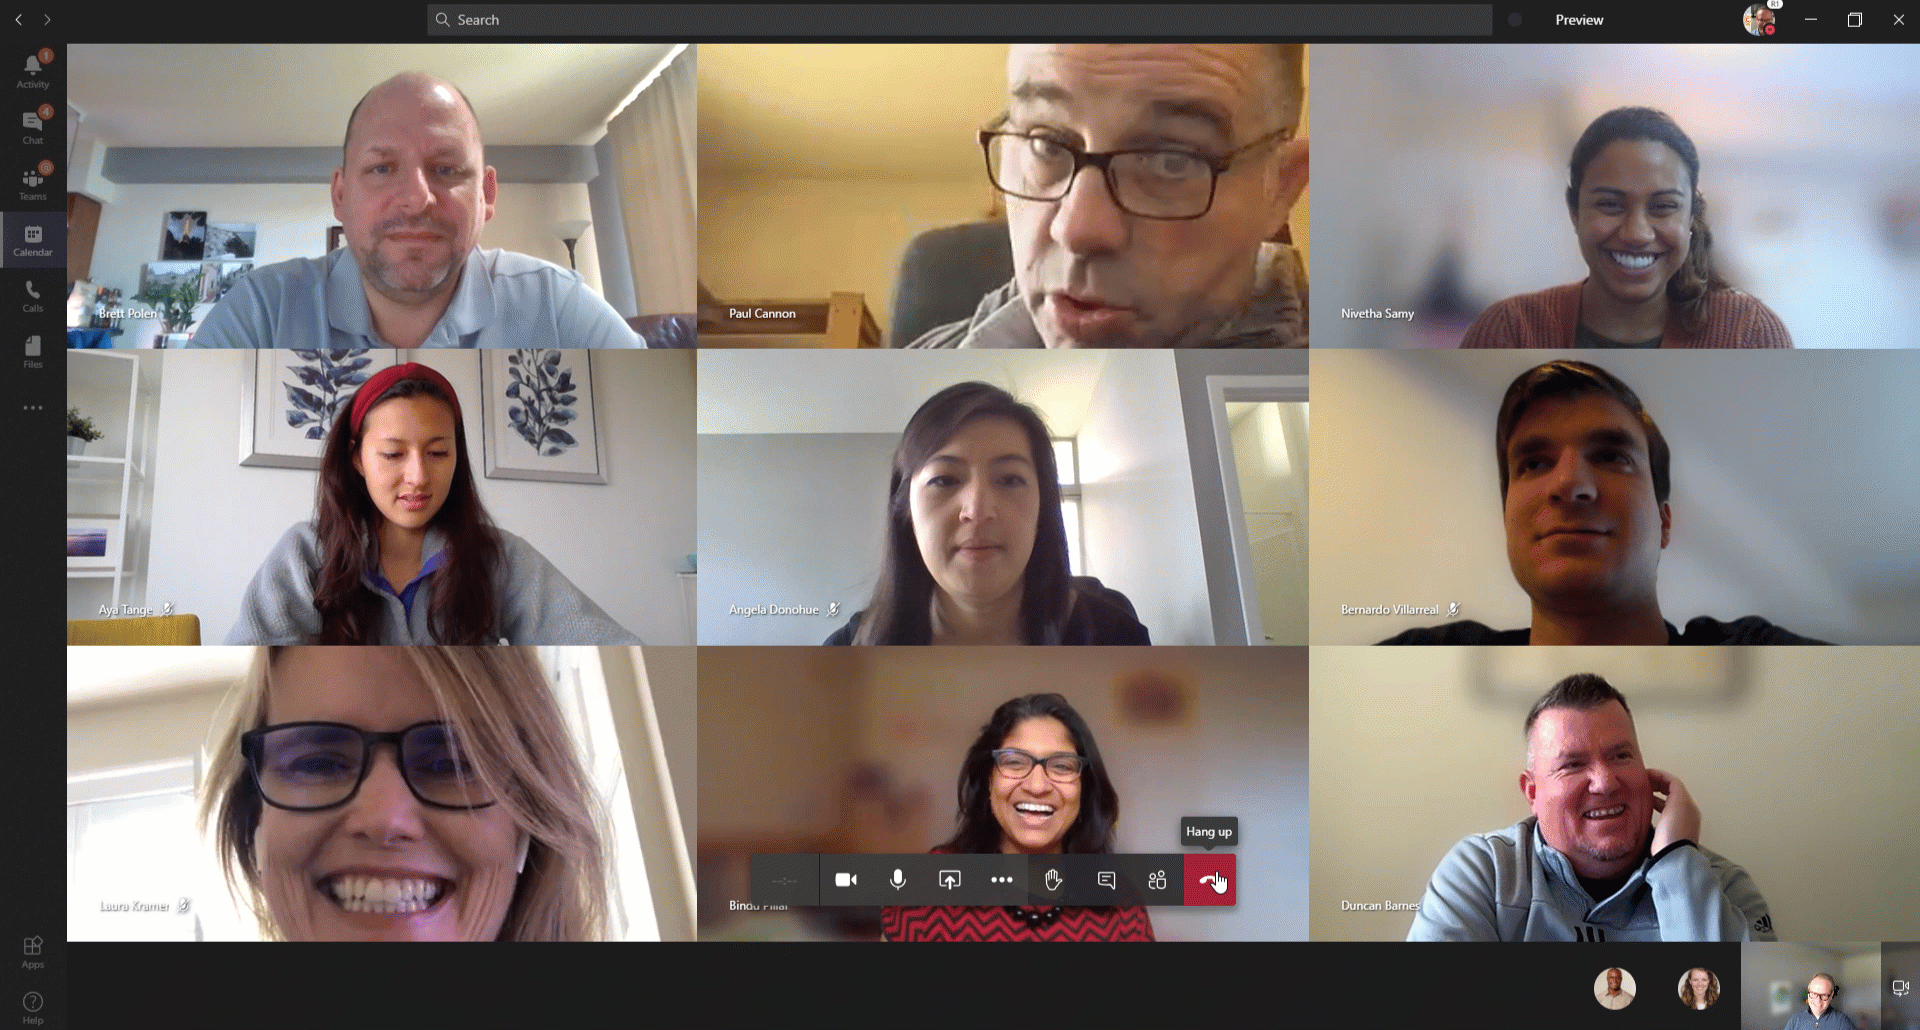 A demonstration of the new 9-person 3x3 Microsoft Teams meeting stage.